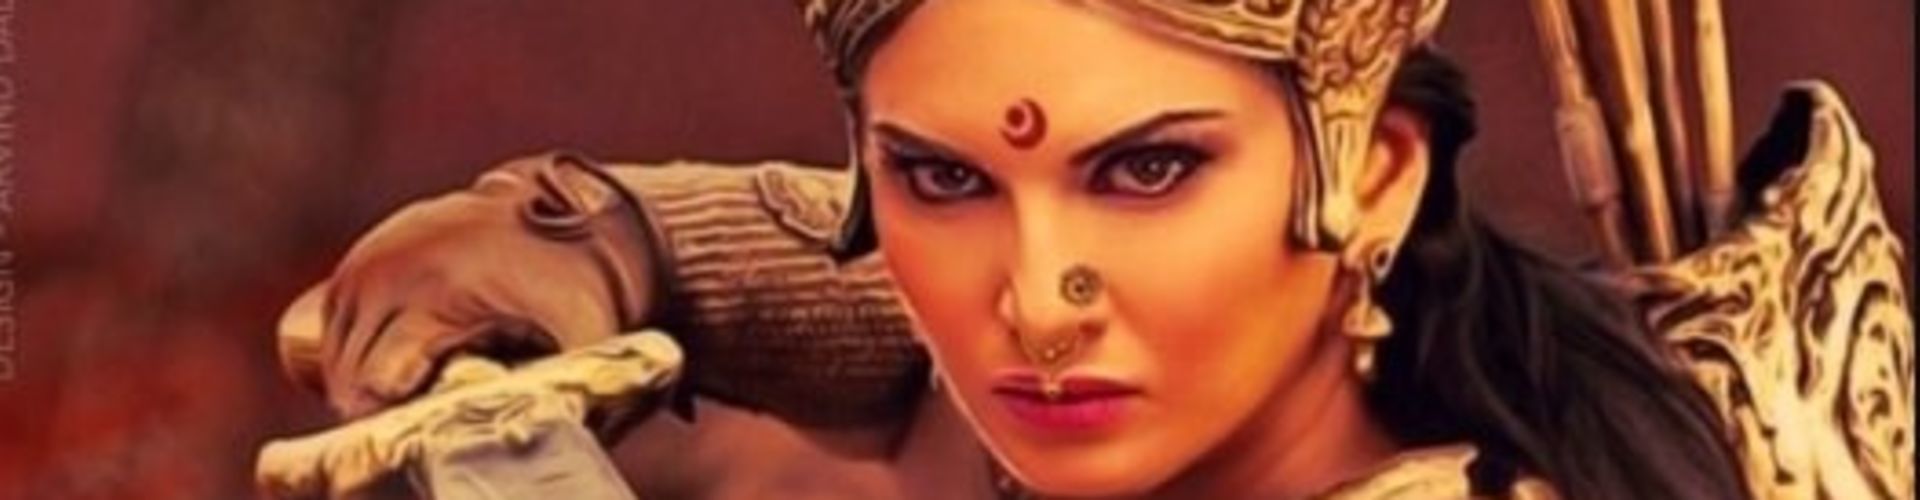 Sunny Leone, playing Veeramadevi in the upcoming Tamil film faces opposition